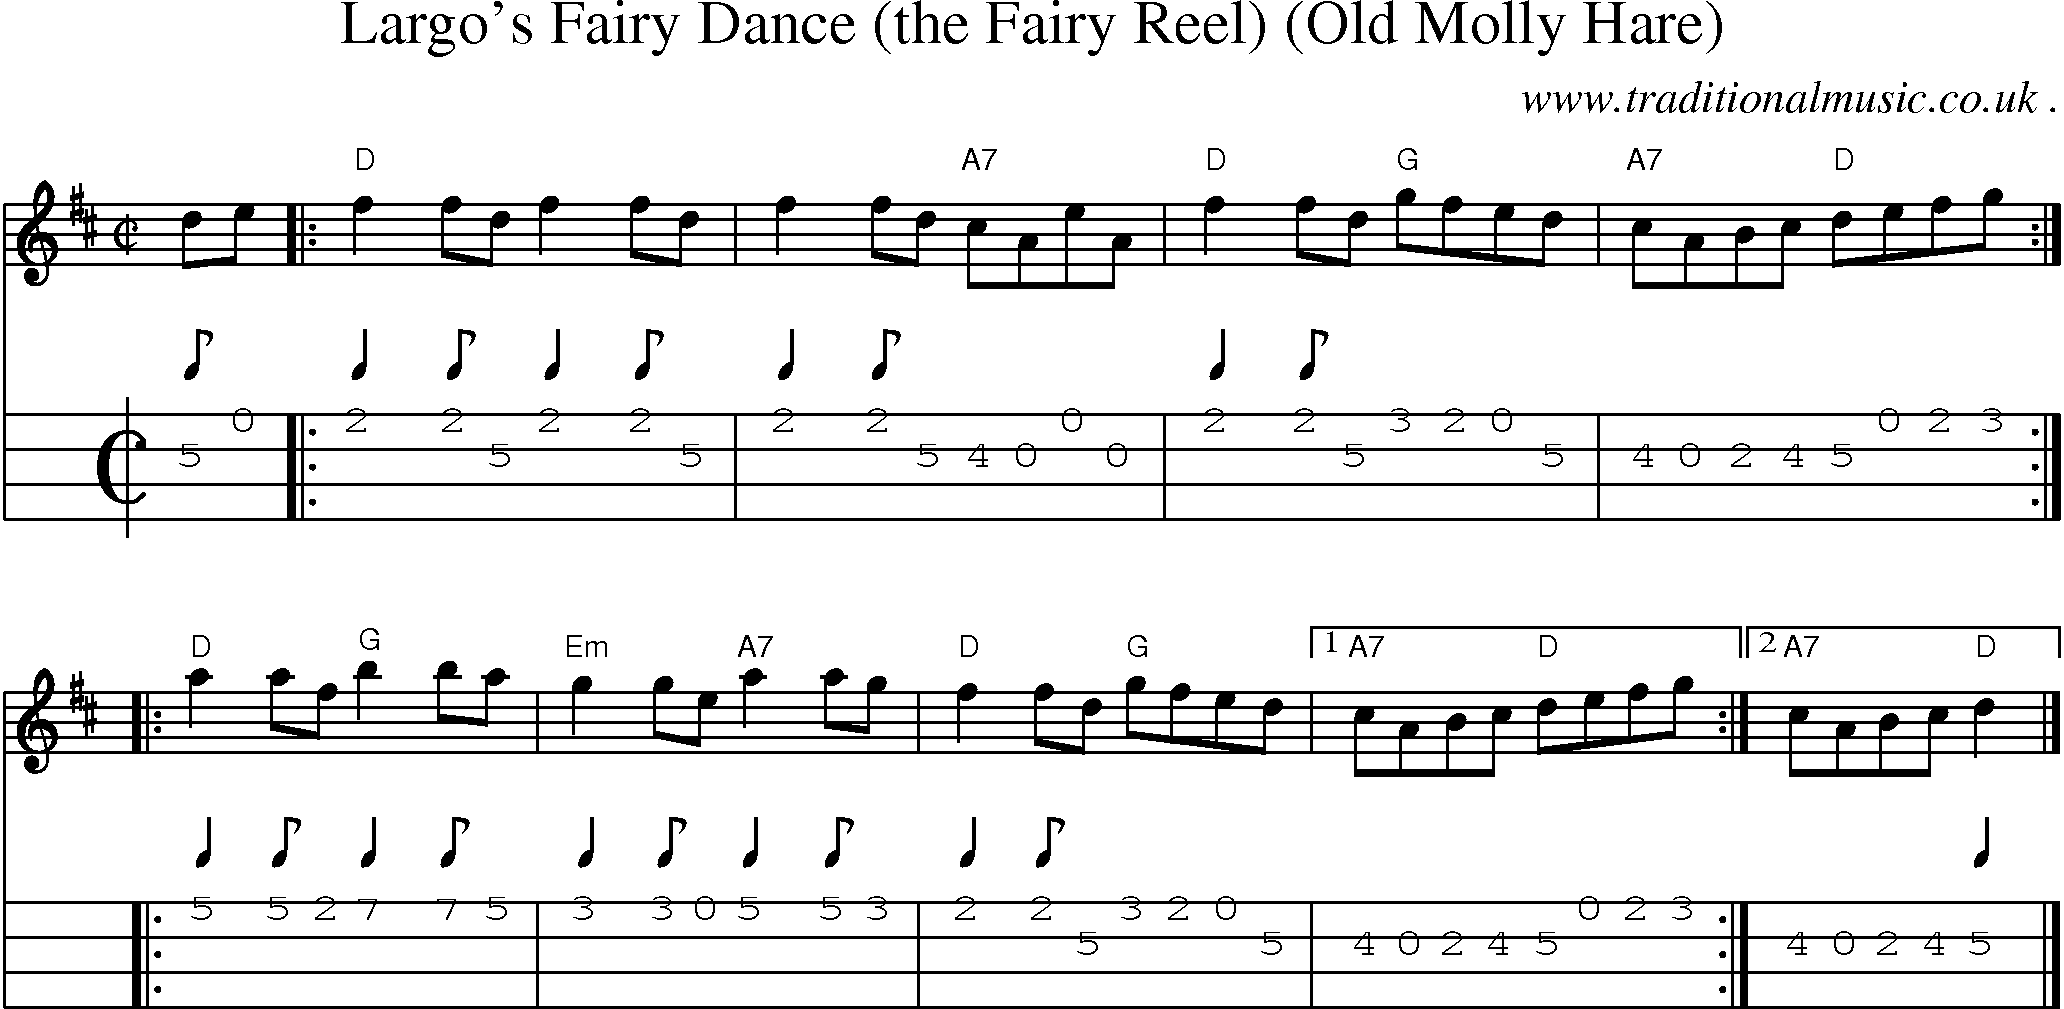 Sheet-music  score, Chords and Mandolin Tabs for Largos Fairy Dance The Fairy Reel Old Molly Hare